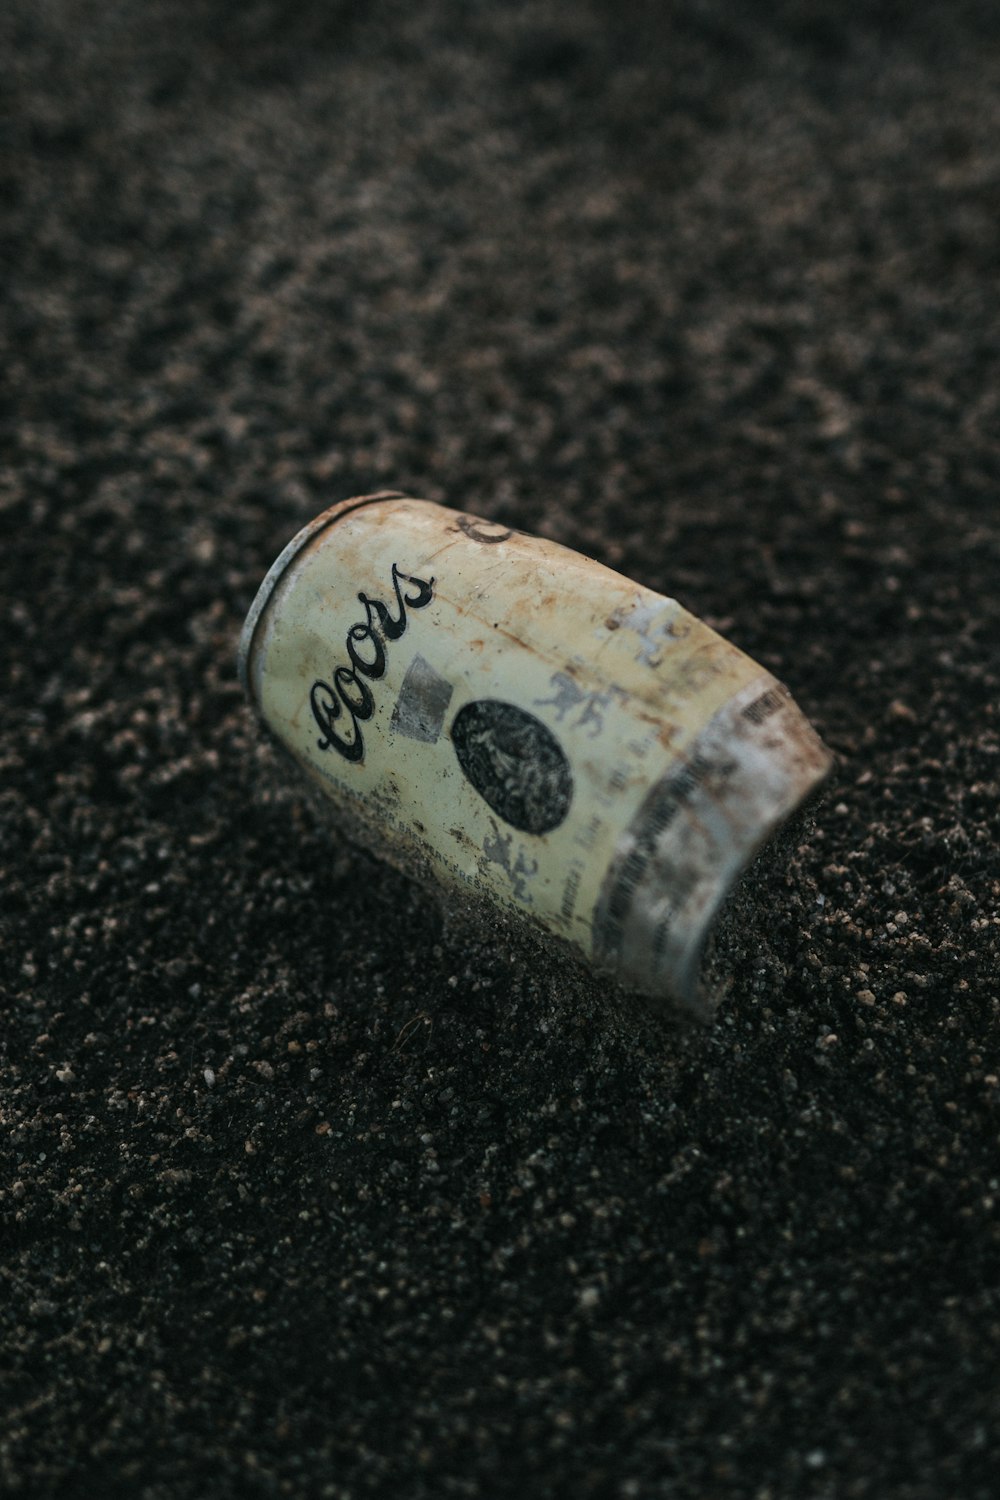 Coors beer can on black sand